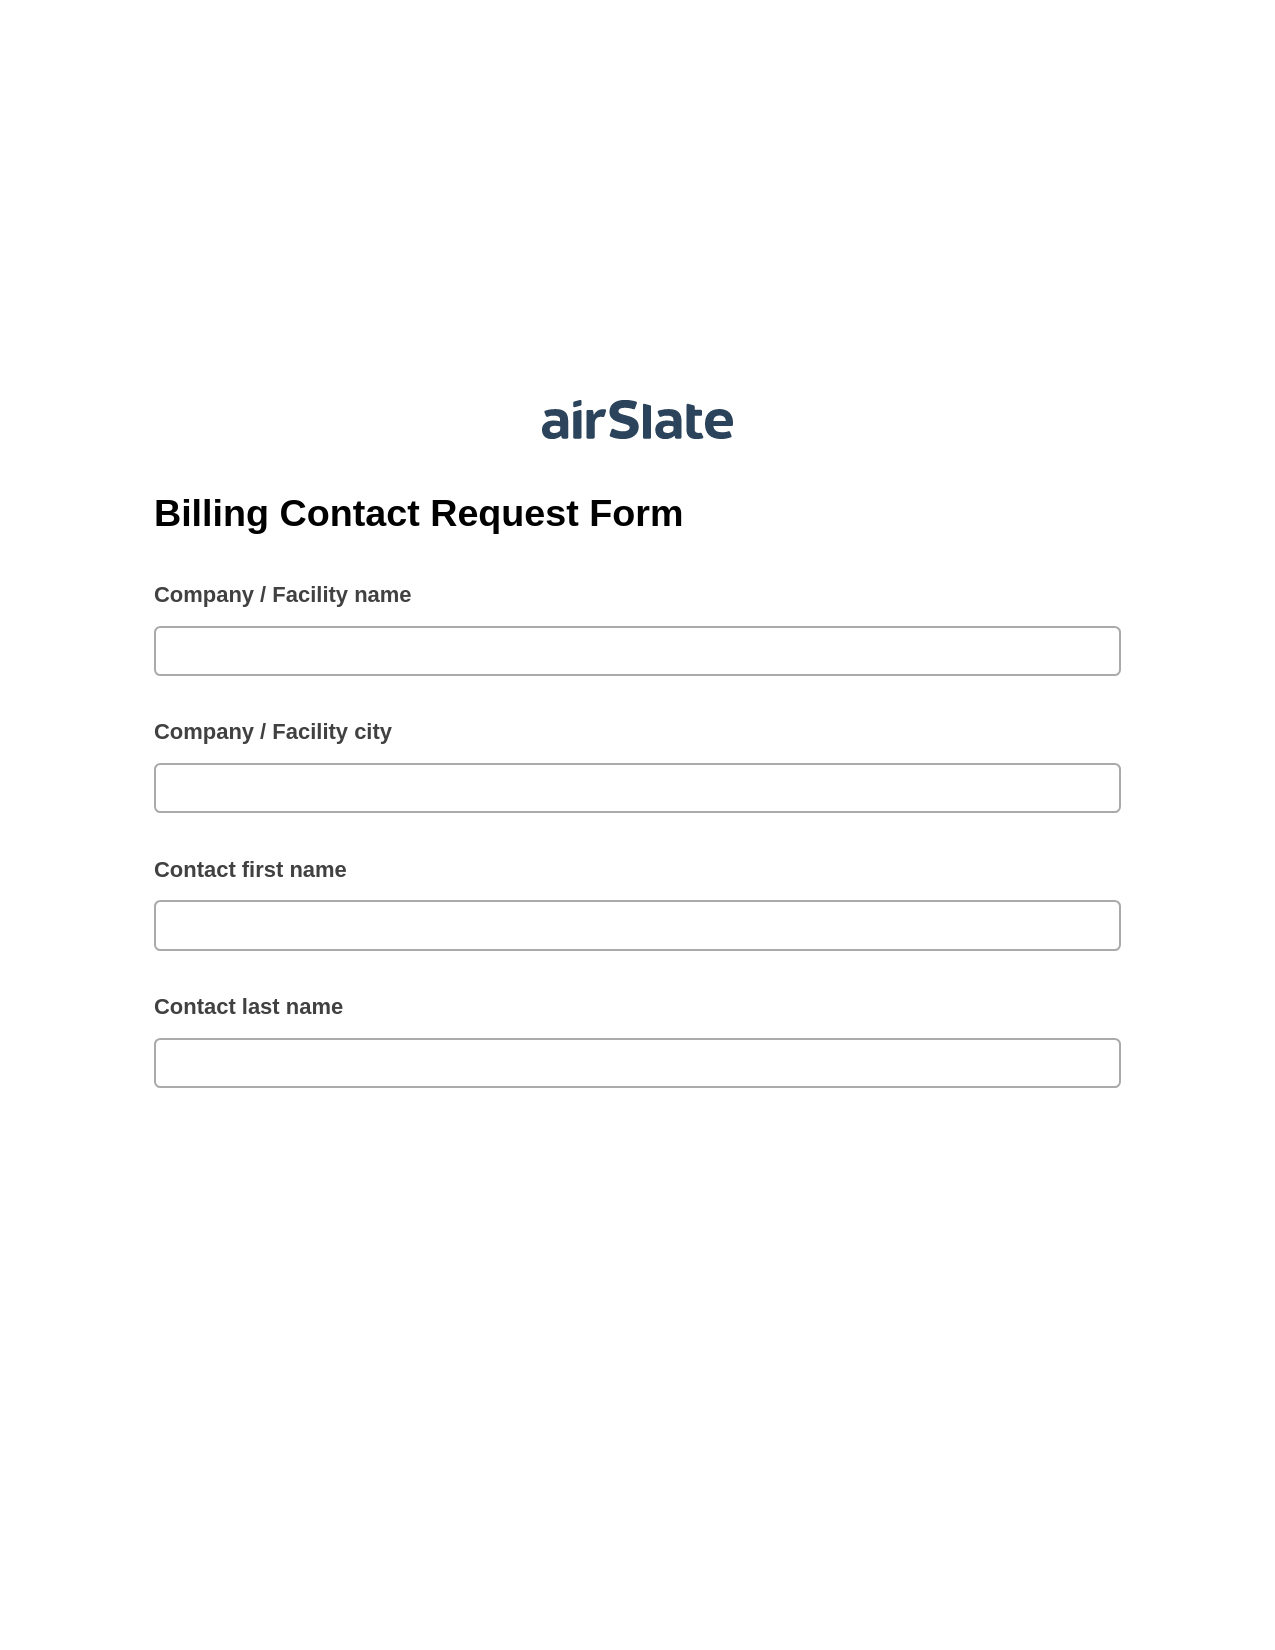 Billing Contact Request Form Pre-fill Dropdowns from Google Sheet Bot, Unassign Role Bot, Export to Salesforce Bot